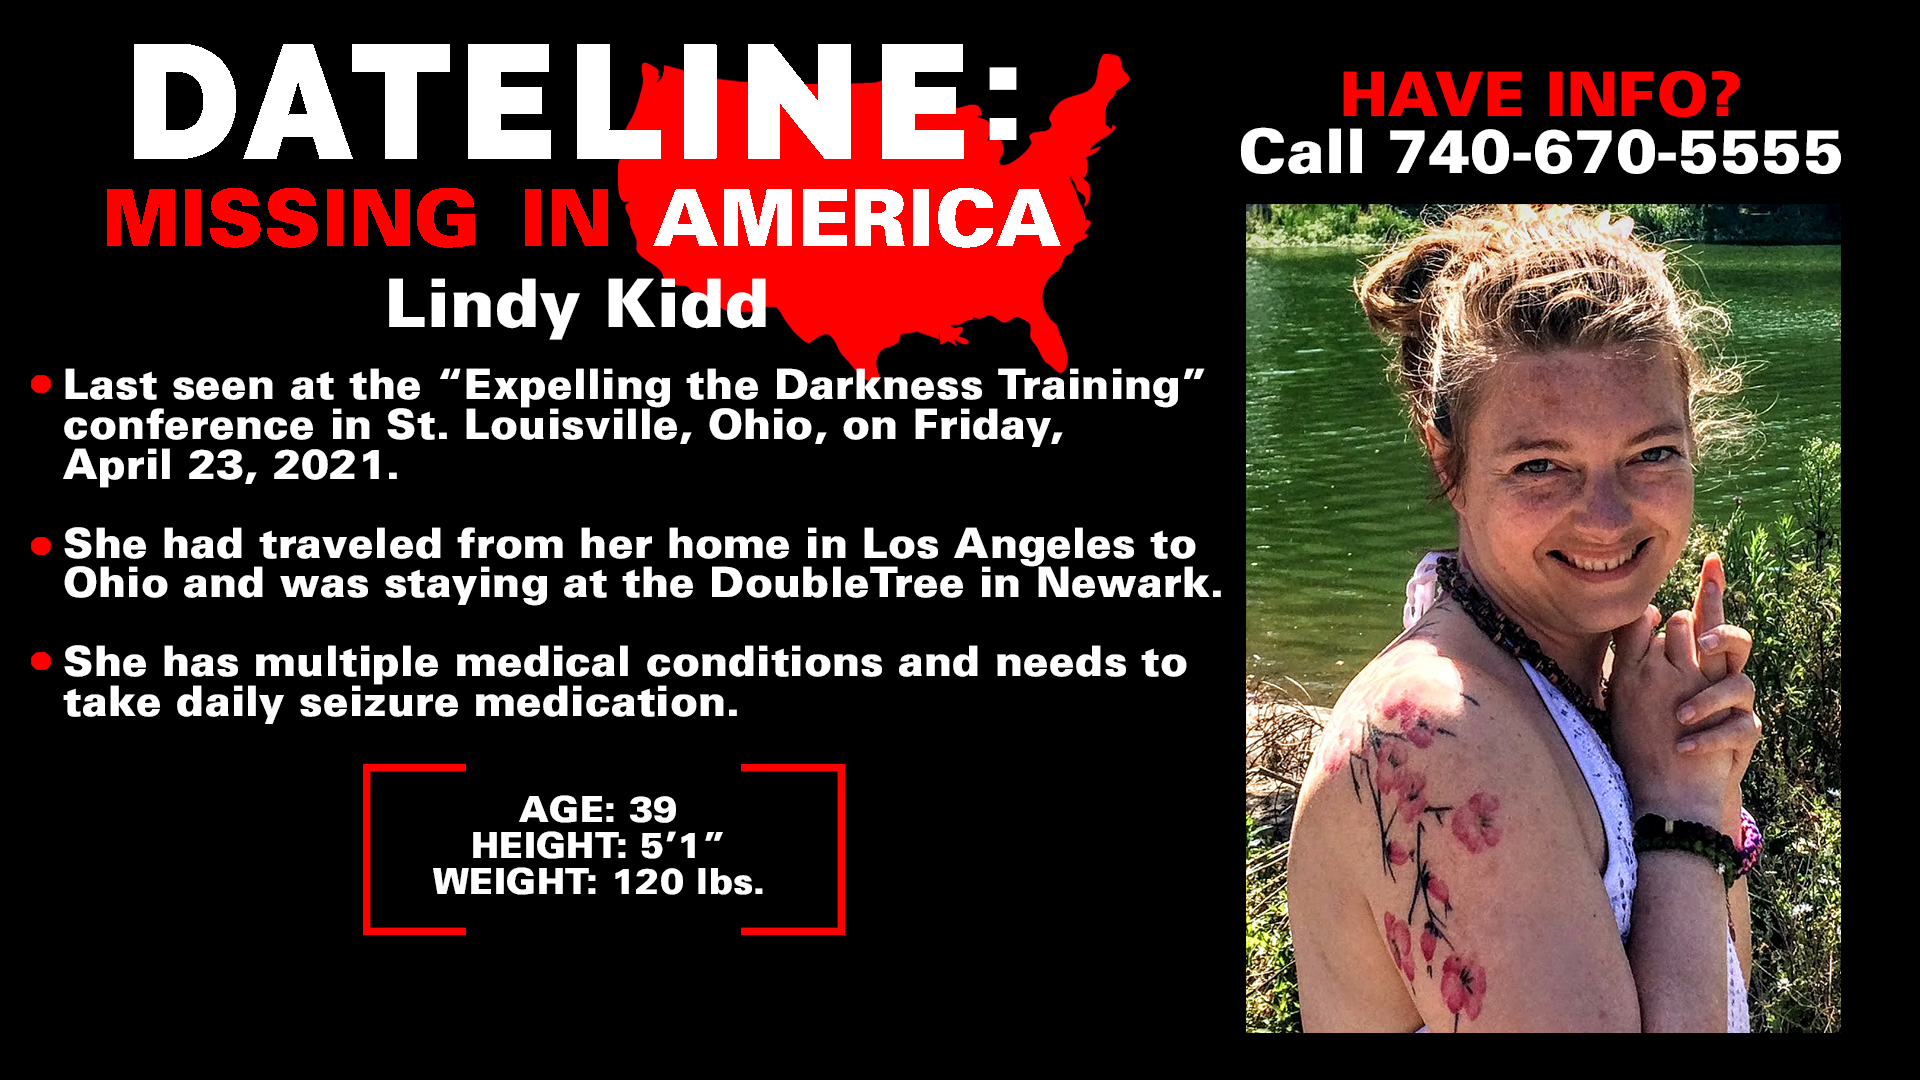 Dateline NBC on Twitter: "Lindy Kidd left her Los Angeles home in April to  attend the “Expelling the Darkness Training” conference in St. Louisville,  Ohio. She never returned and hasn't been seen